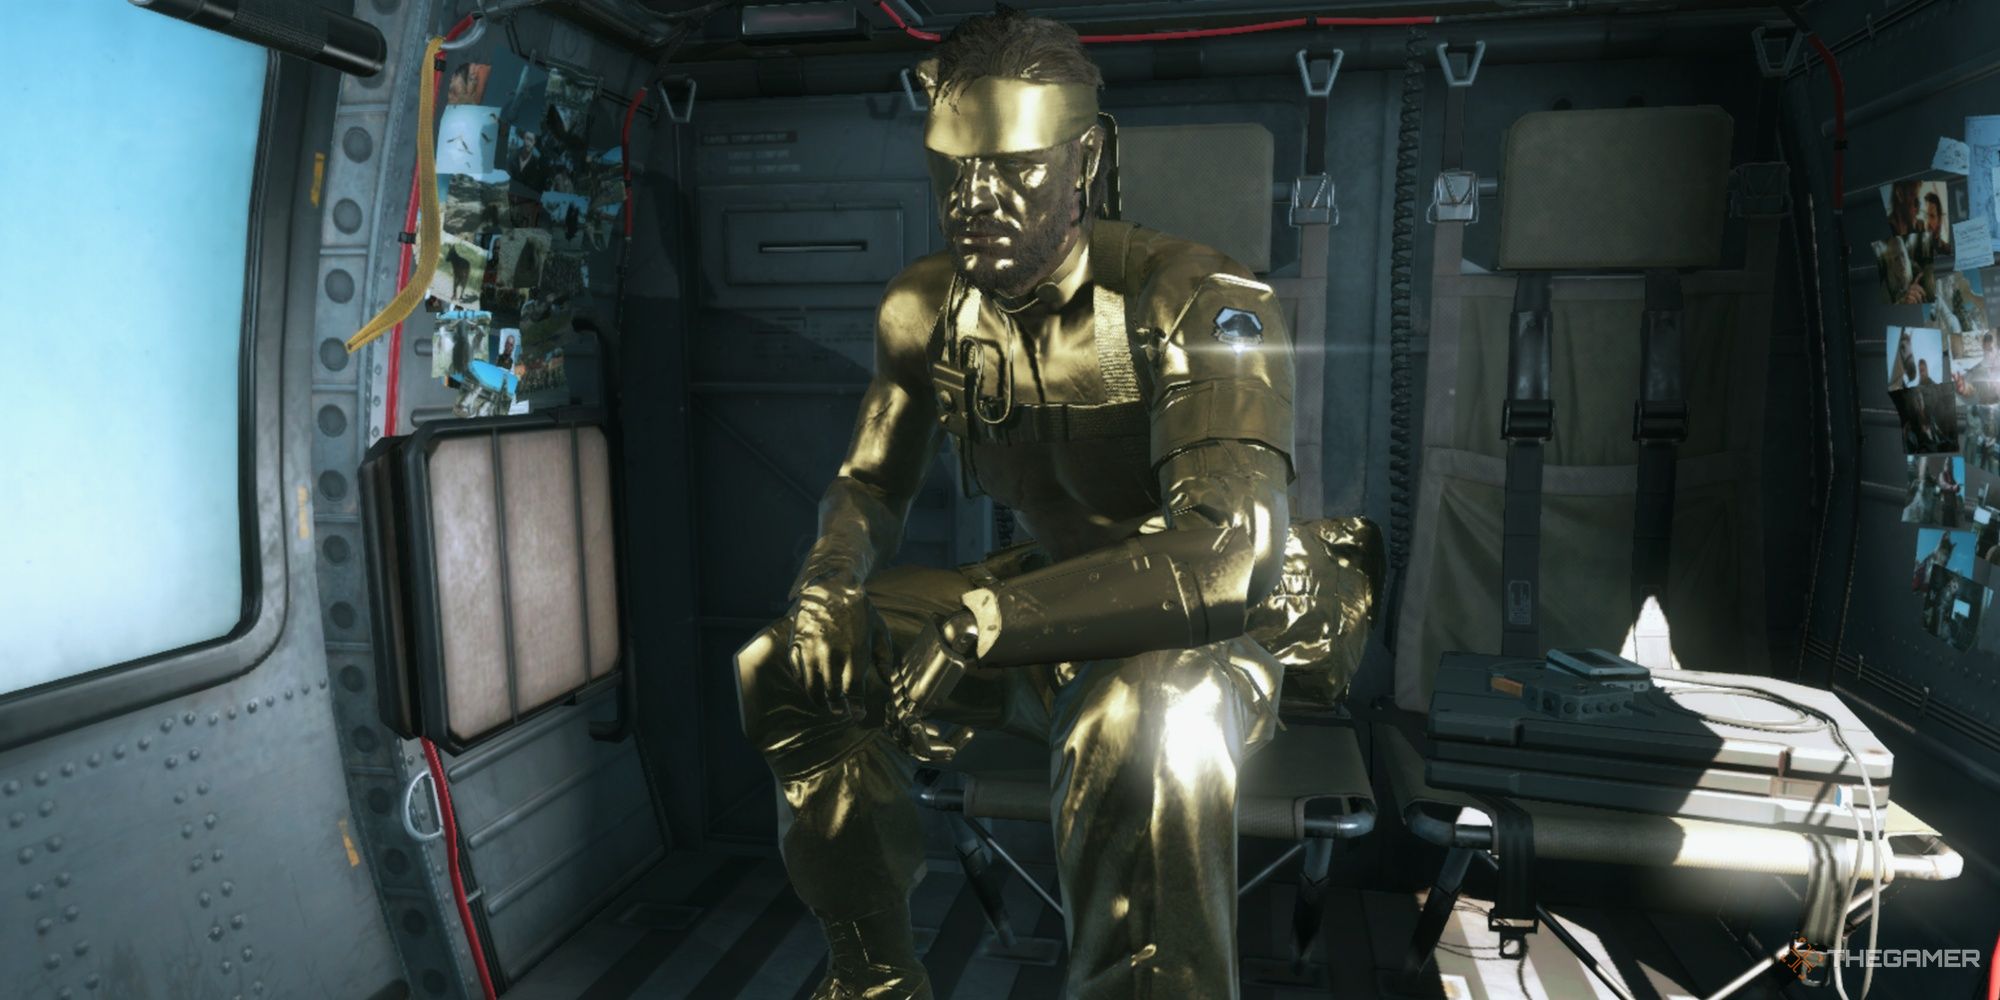 Gold Snake in a helicopter in Metal Gear Solid 5 The Phantom Pain